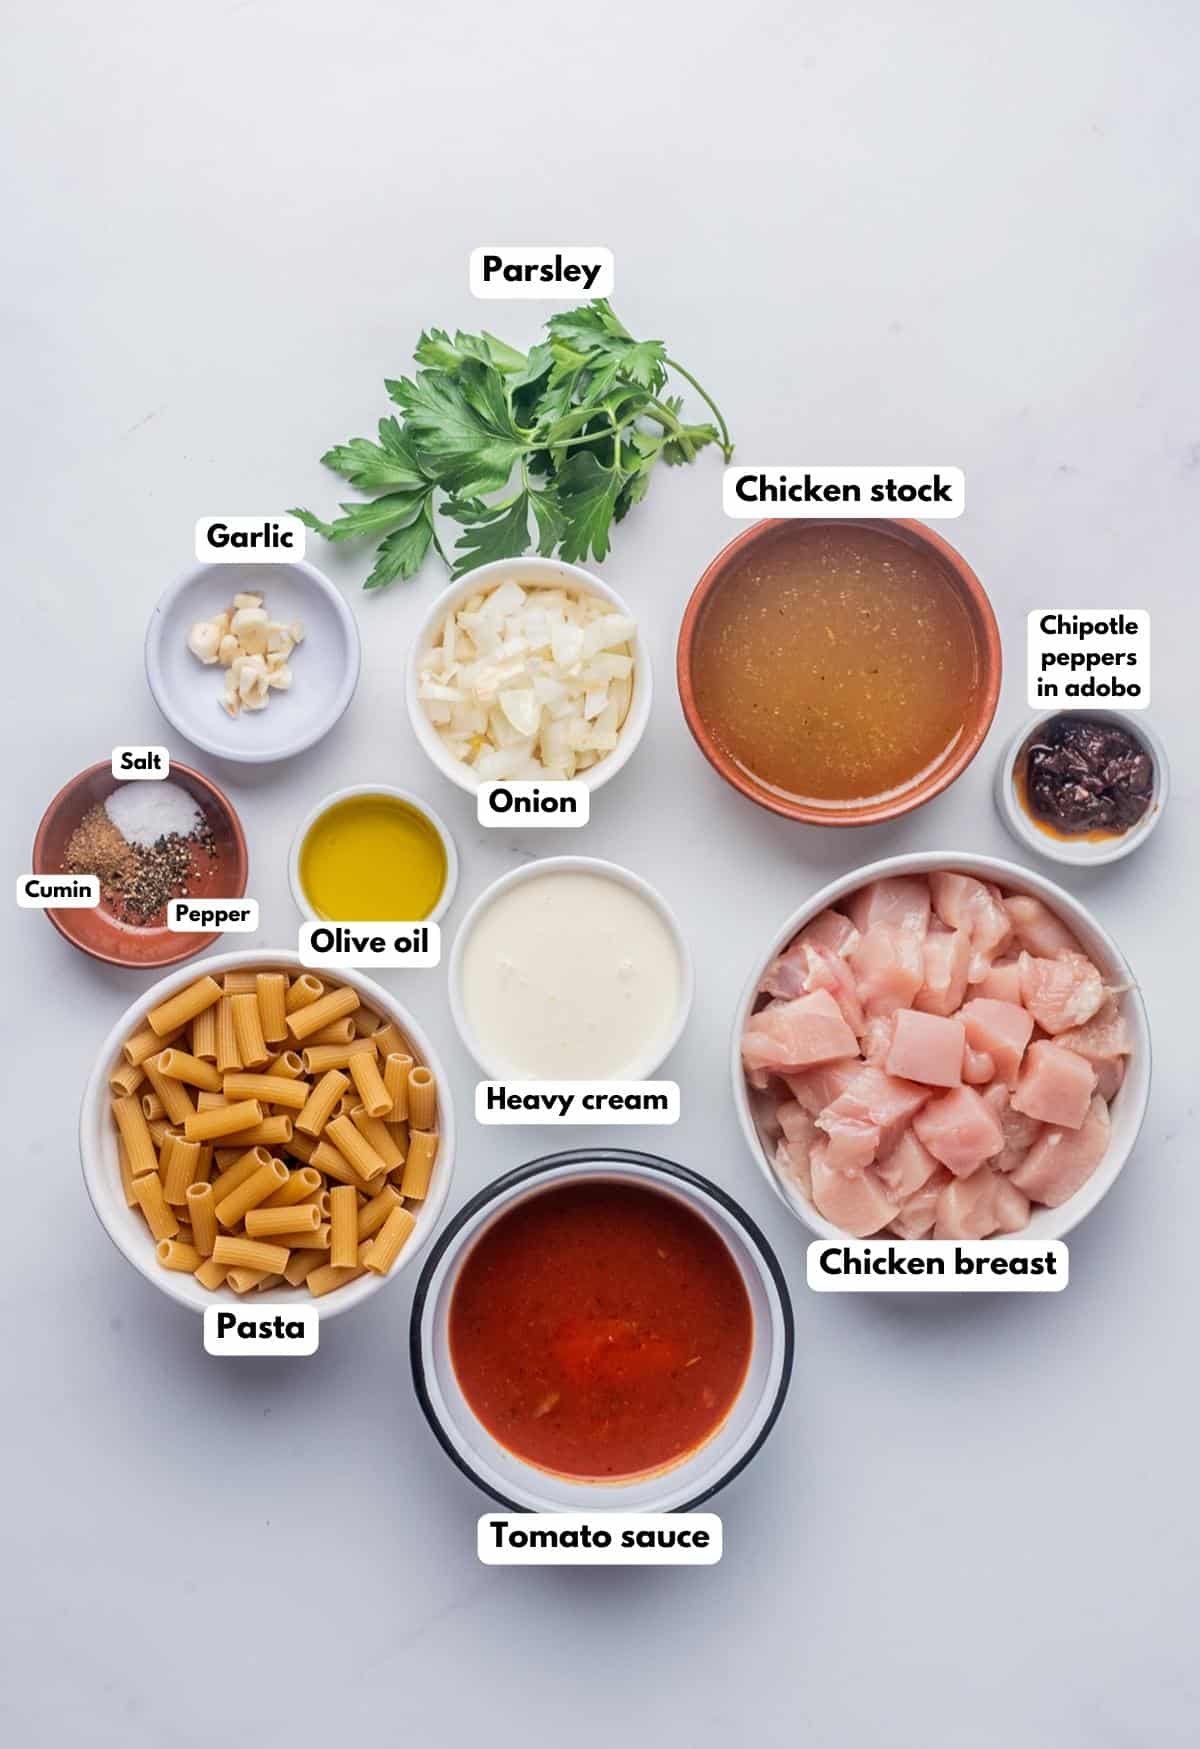 The ingredients needed to make the chicken dish.